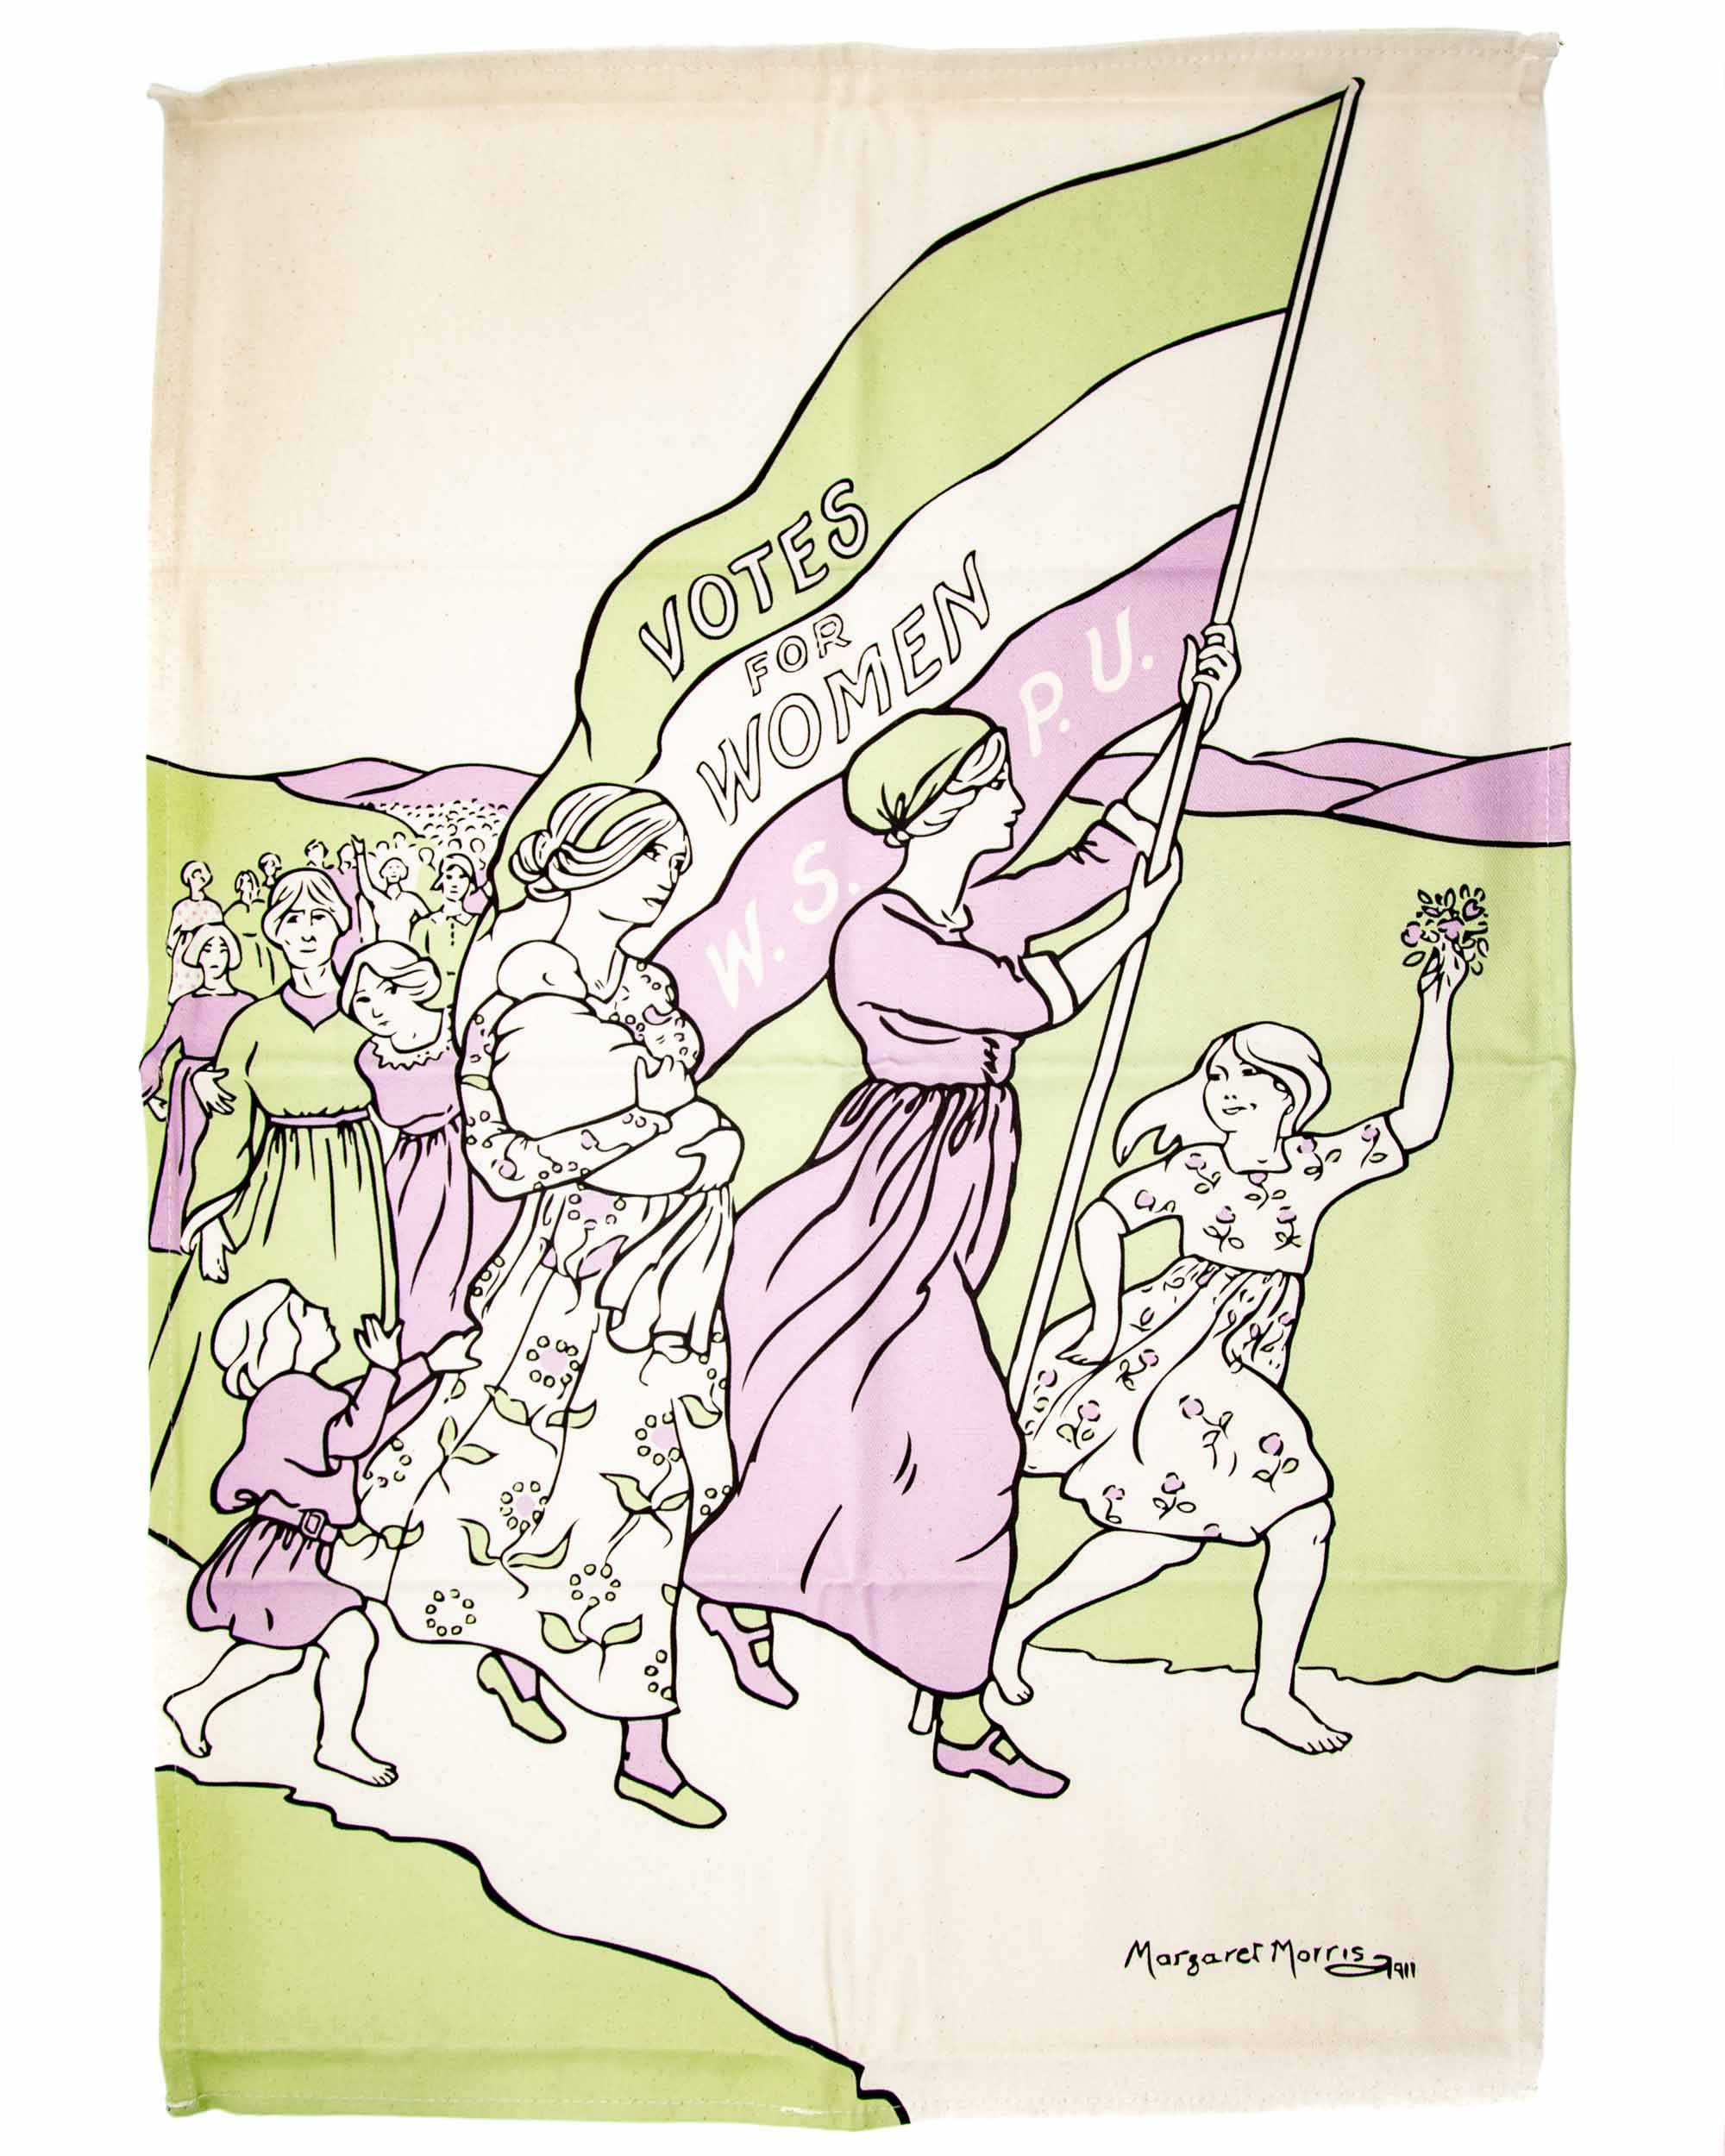 Radical Tea Towel - Women's March - Mortise And Tenon